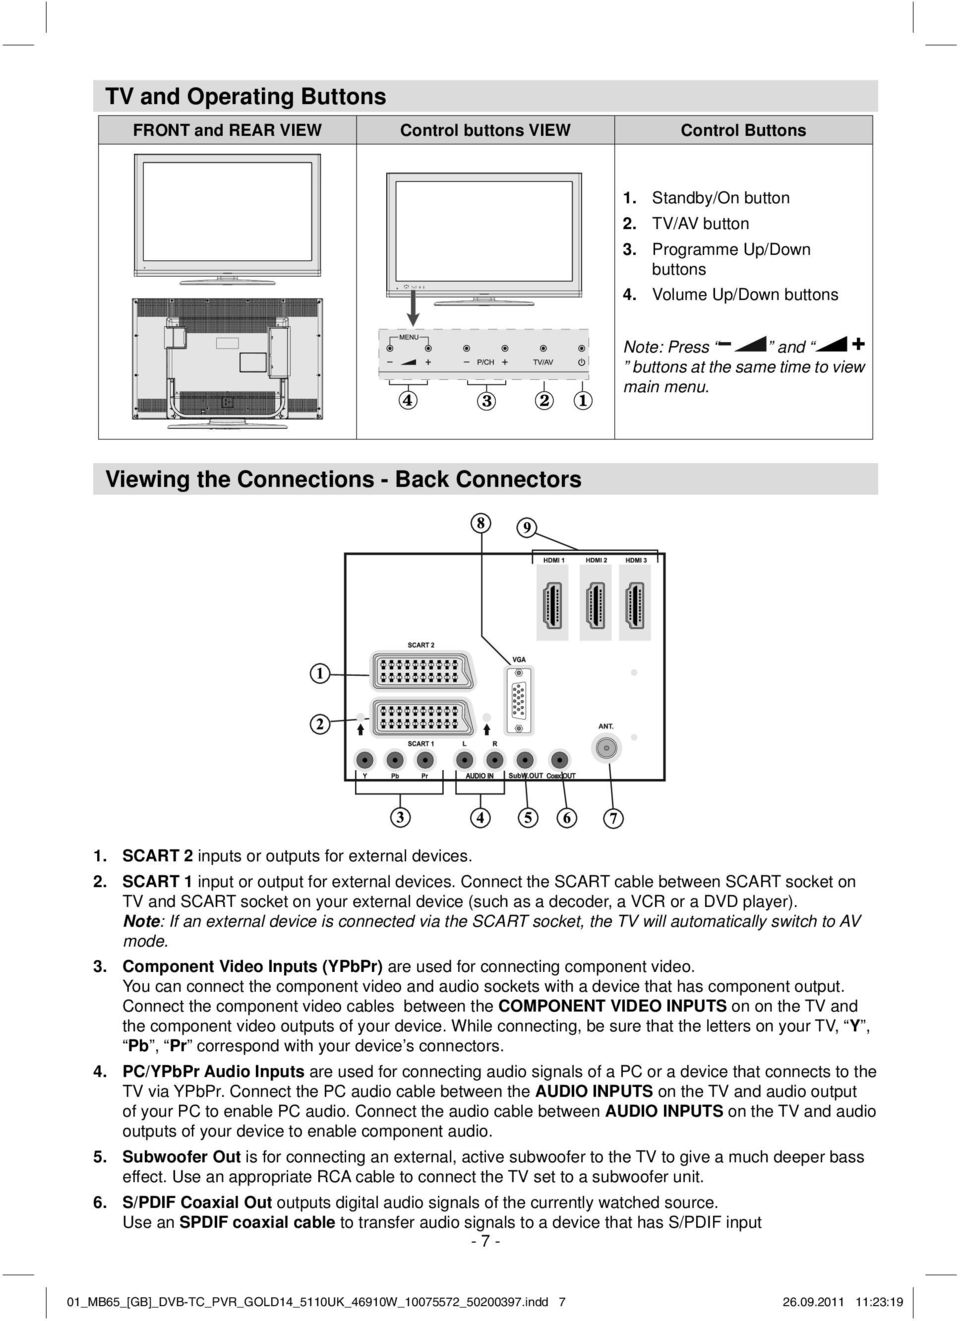 SCART 2 inputs or outputs for external devices. 2. SCART 1 input or output for external devices.